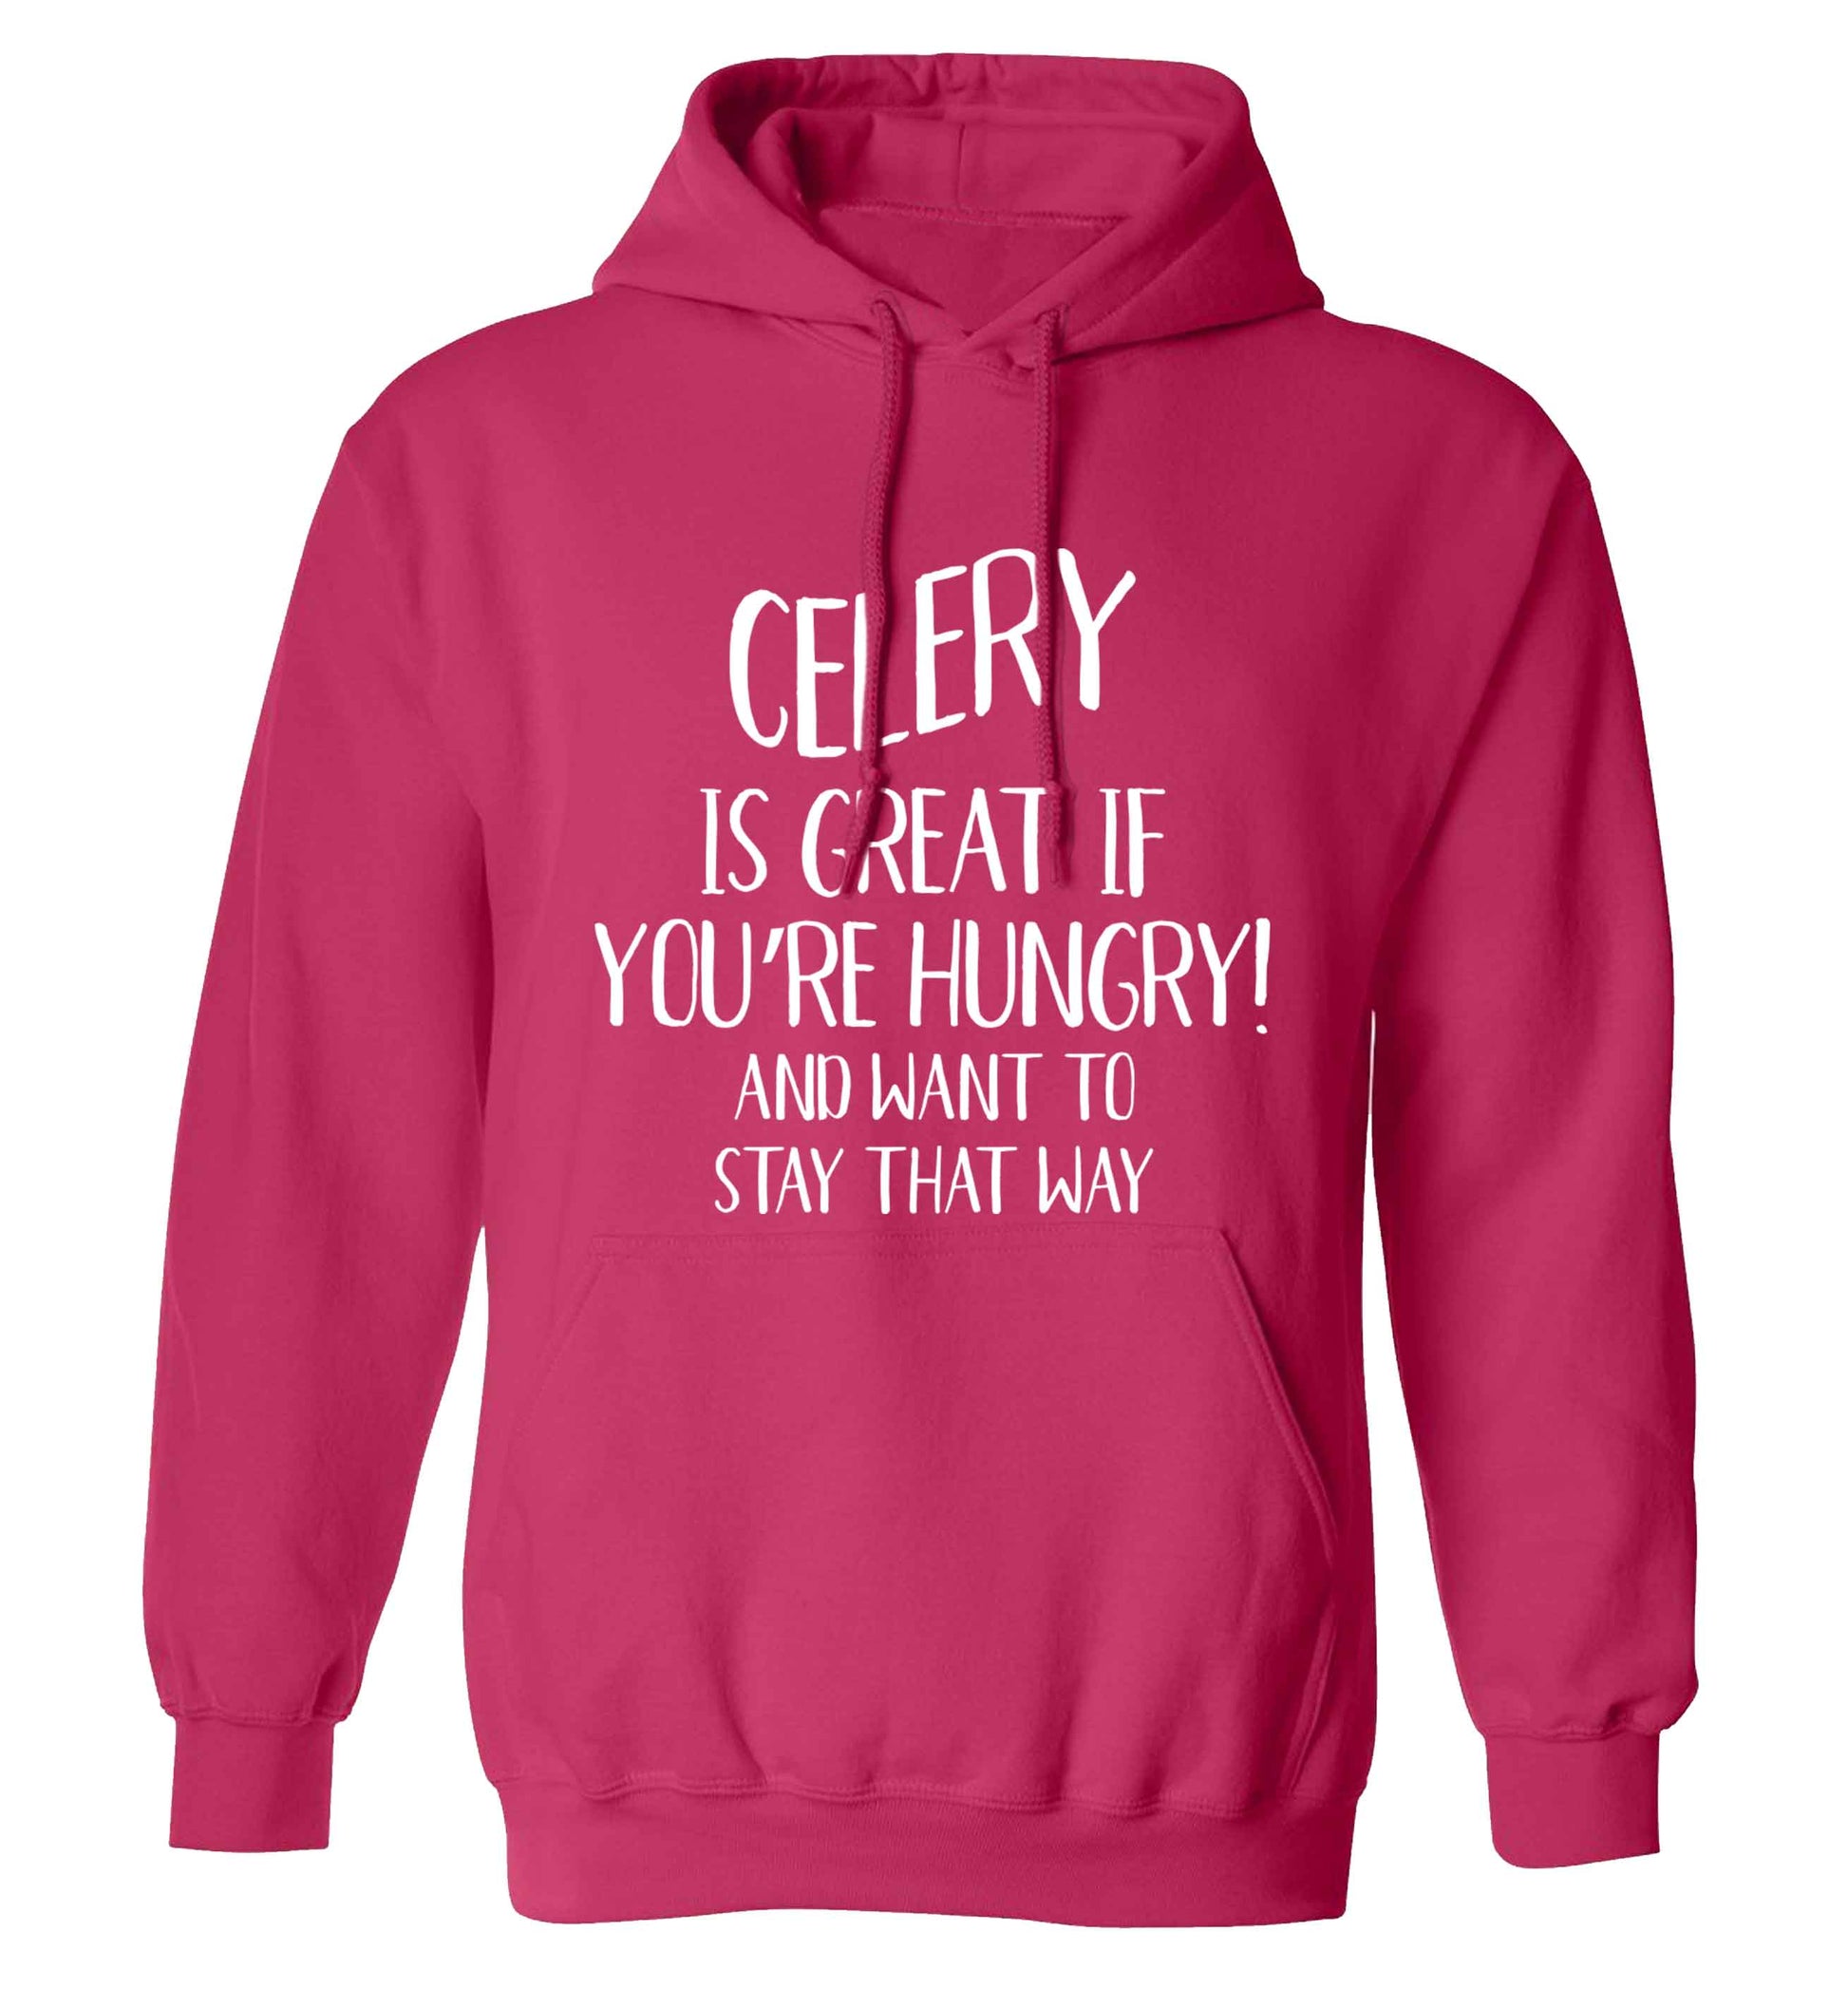 Cellery is great when you're hungry and want to stay that way adults unisex pink hoodie 2XL